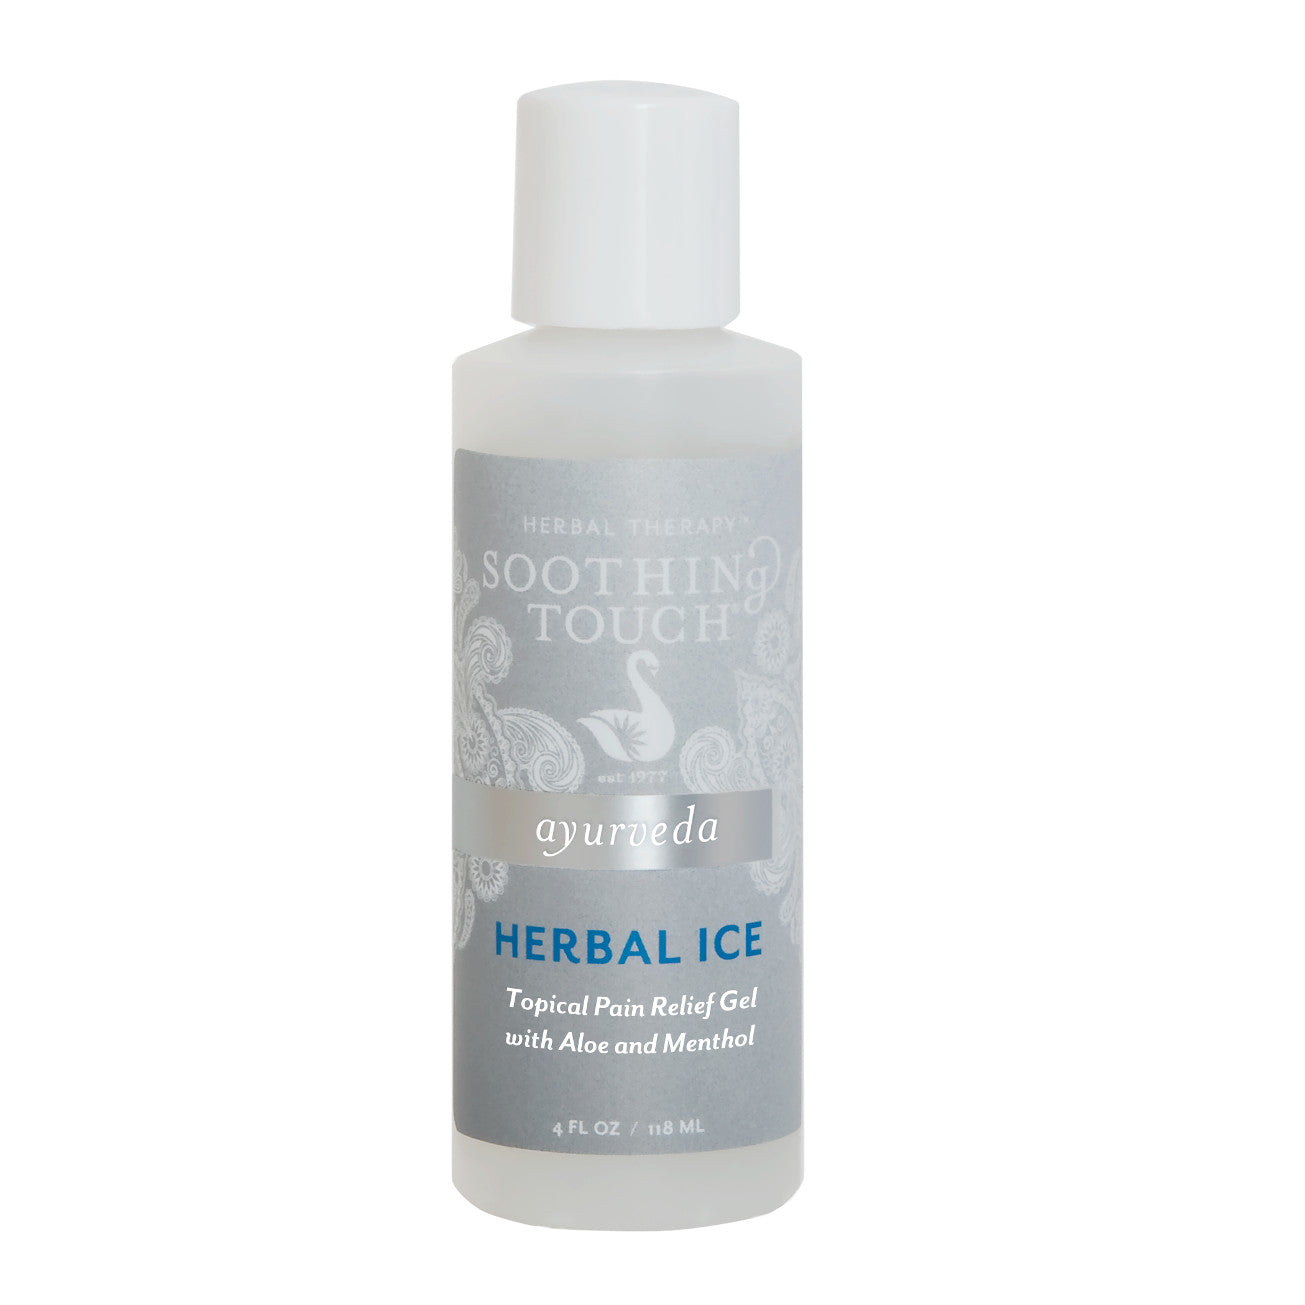 Soothing Touch Herbal Ice - Topical Pain Relief Gel with Menthol